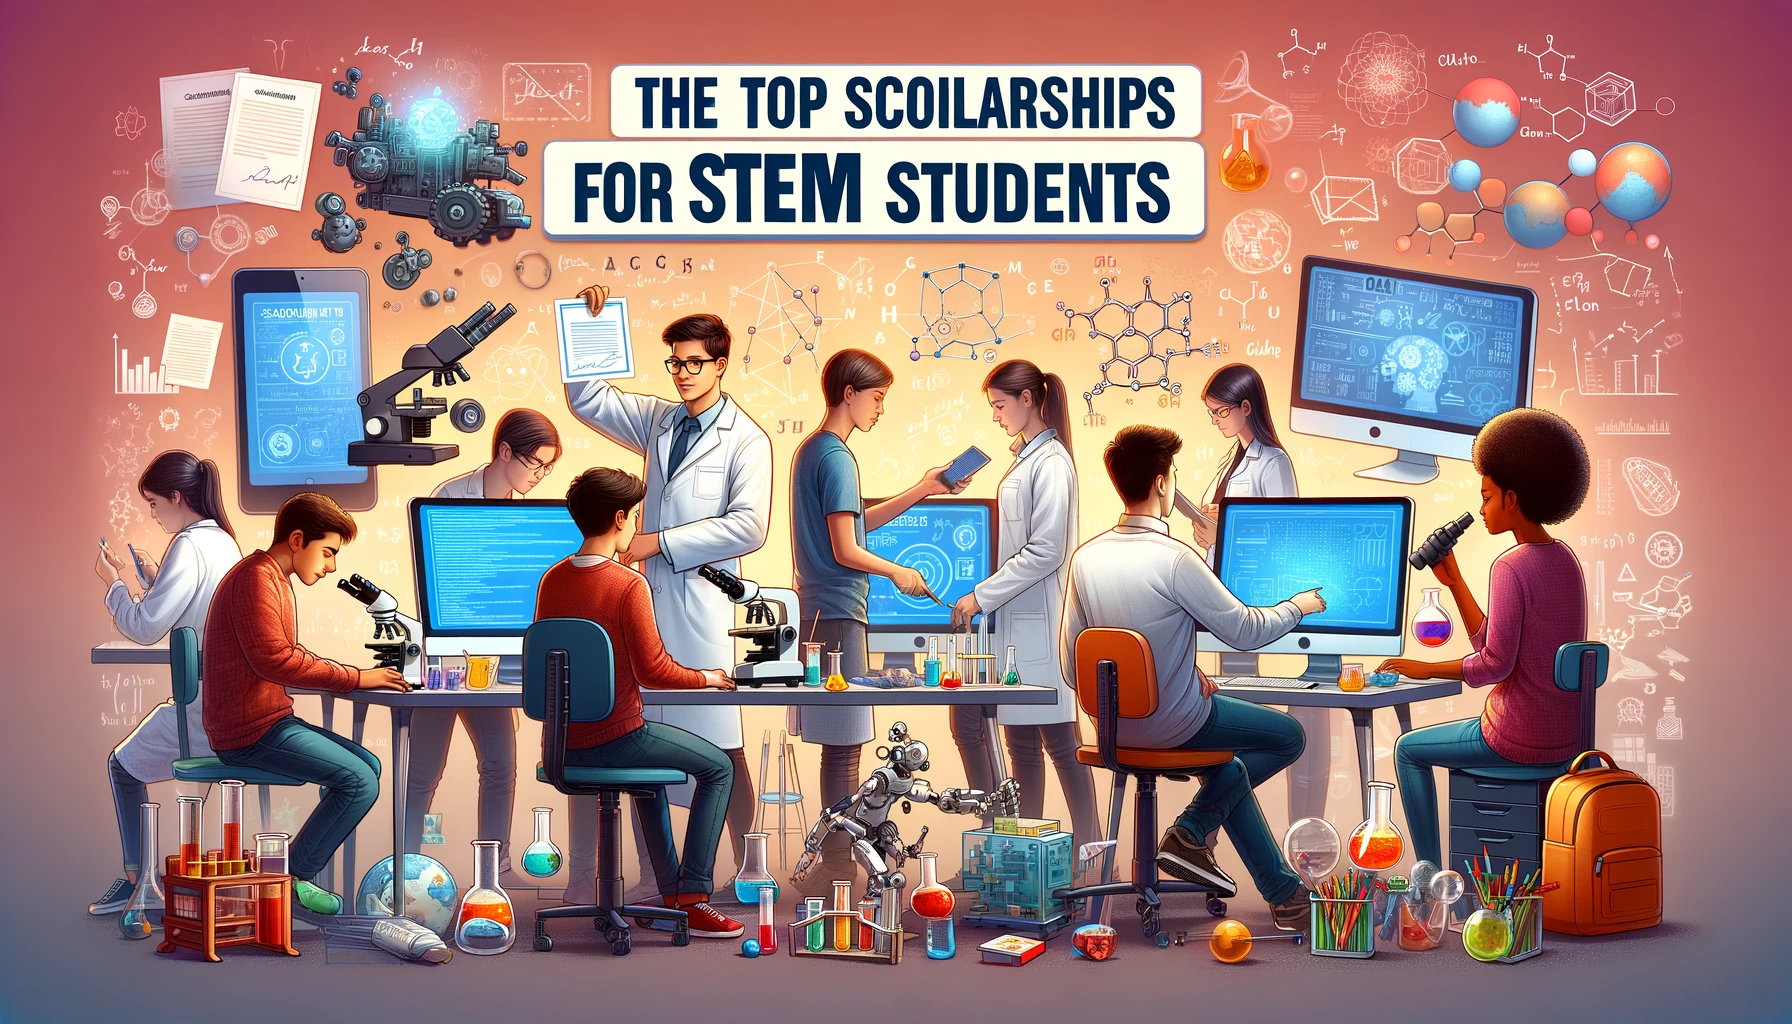 The Top Scholarships for STEM Students